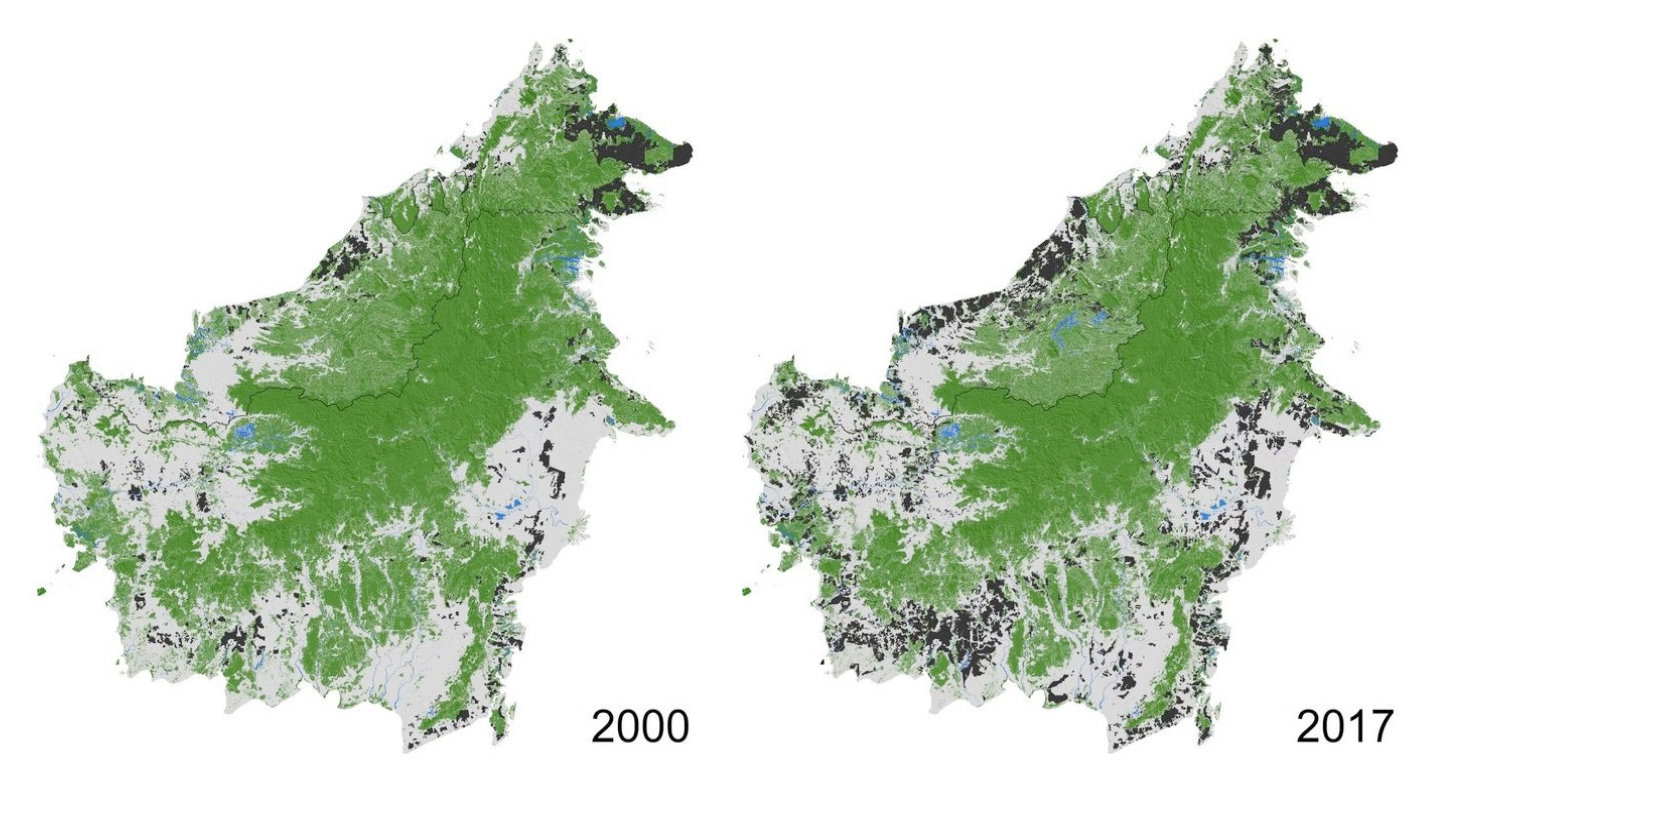 Is deforestation in Borneo slowing down?